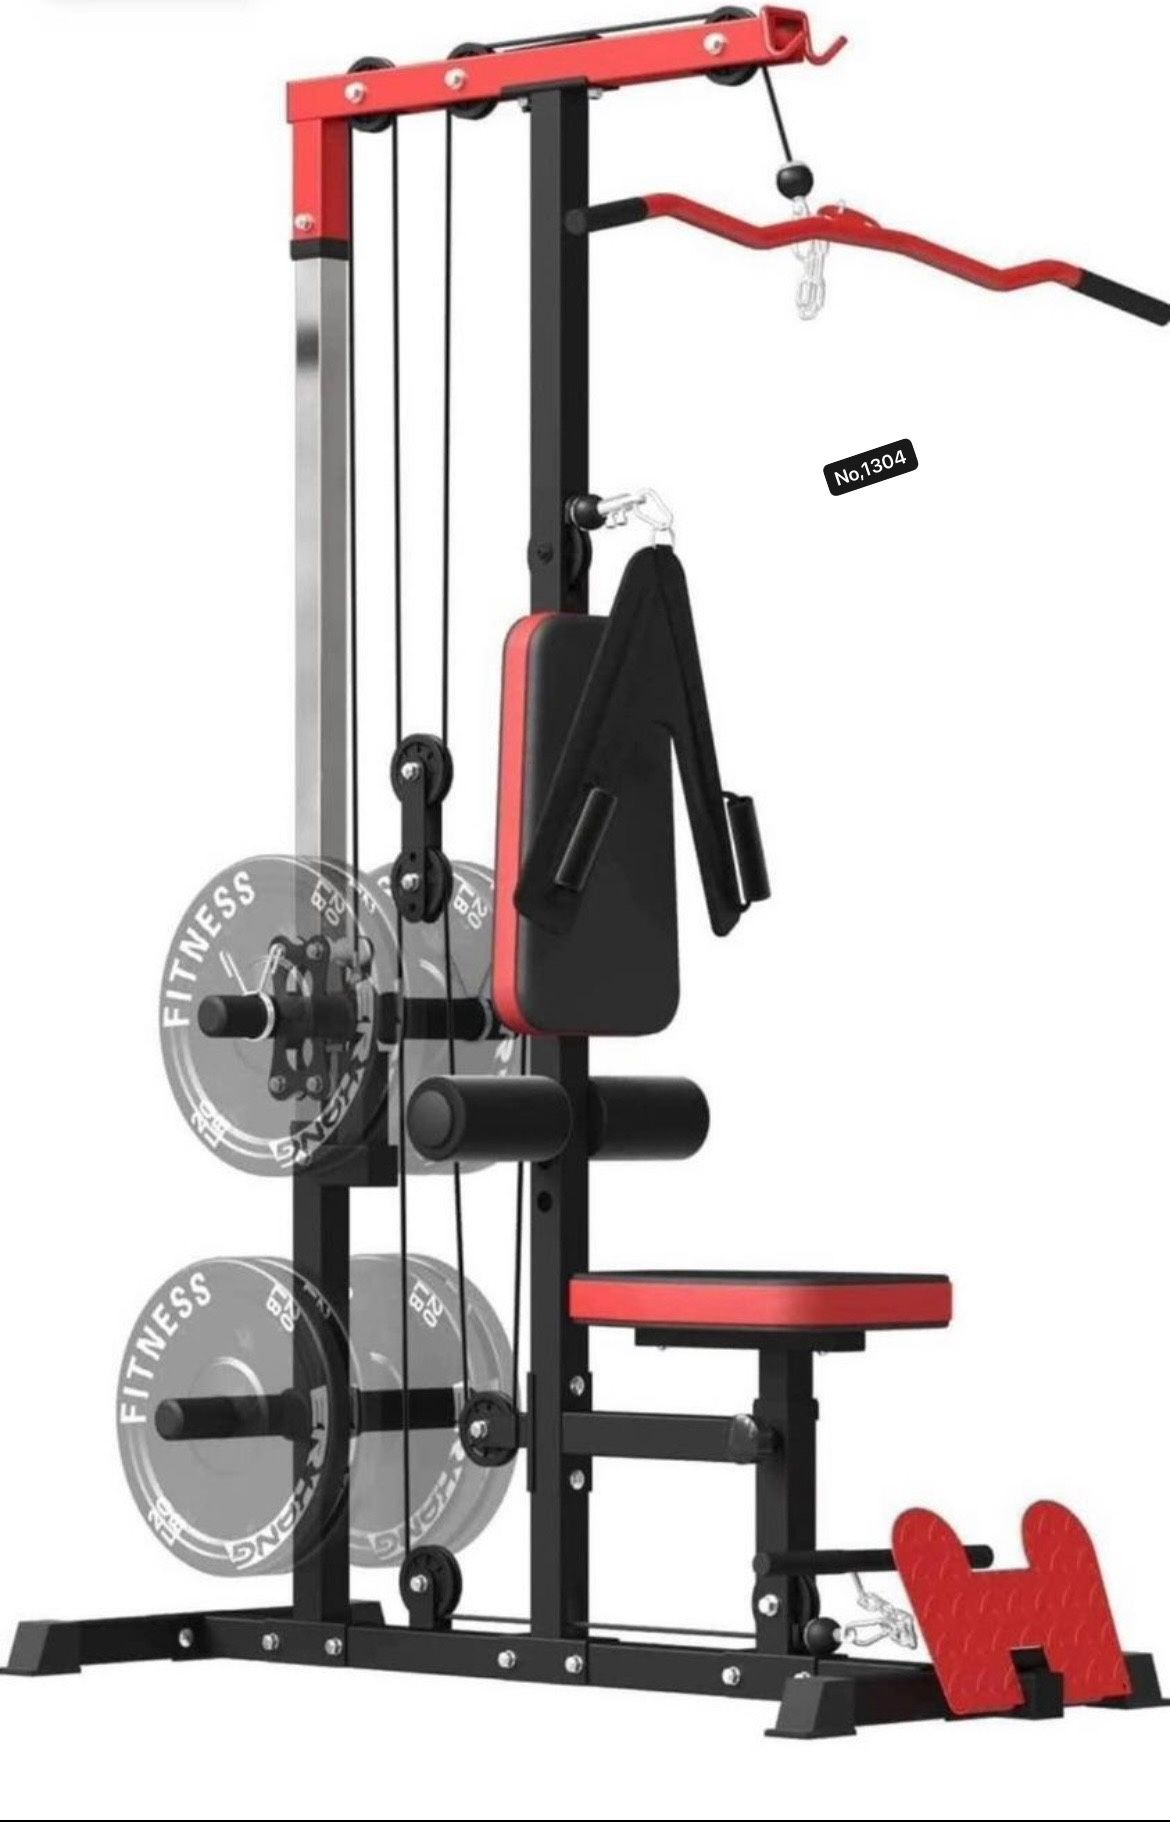 LAT Pull Down and LAT Row Cable Machine with Flip-Up Footplate, High and Low Pulley Station with AB Crunch Harness, Home Gym Back Exercise Weight Mach